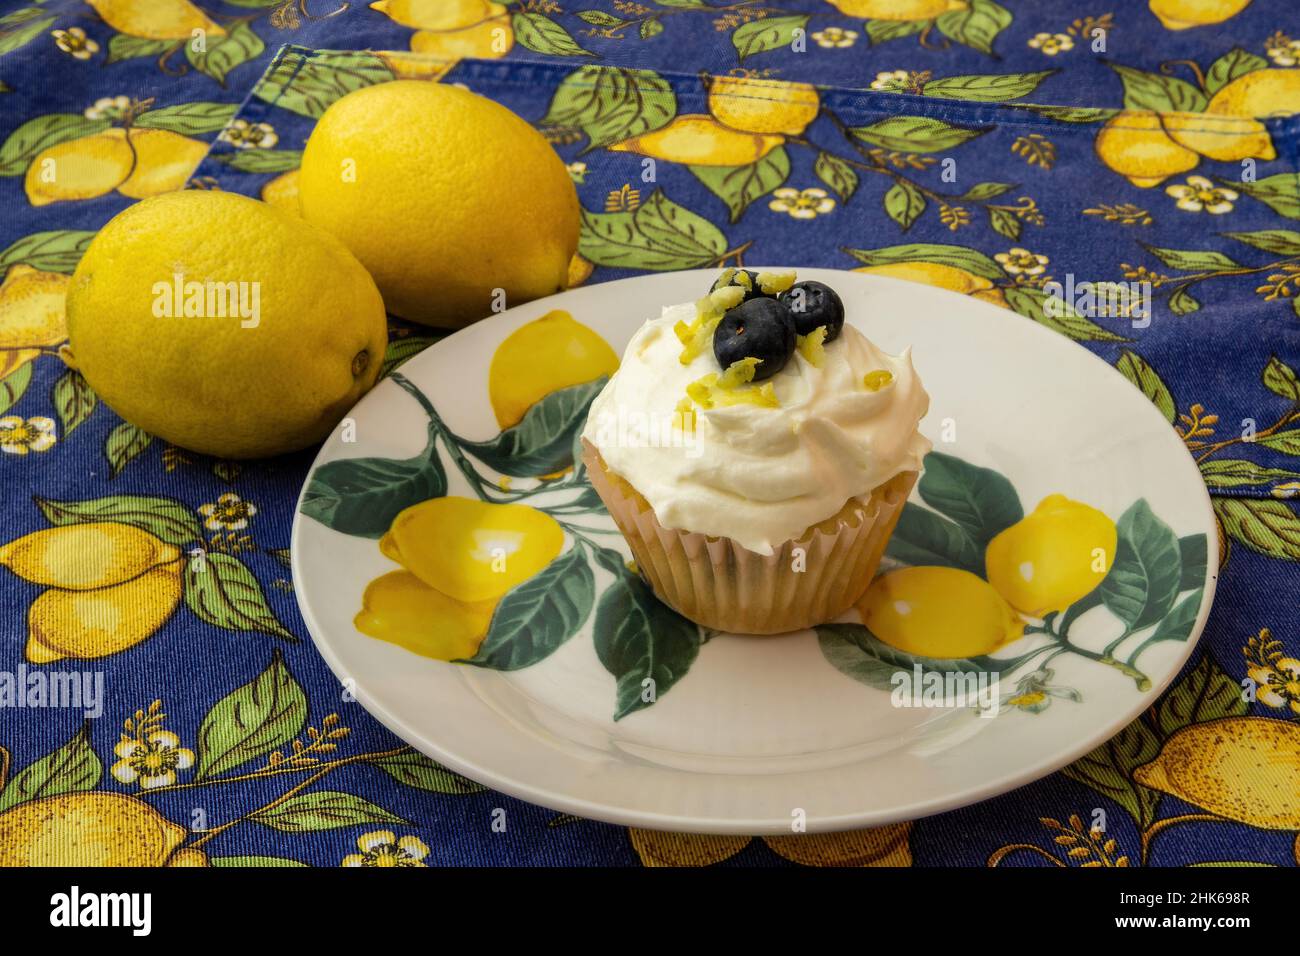 Lemon blueberry cupcake with blueberries and lemon zest with lemons and decorative lemon plate and tablecloth. Stock Photo